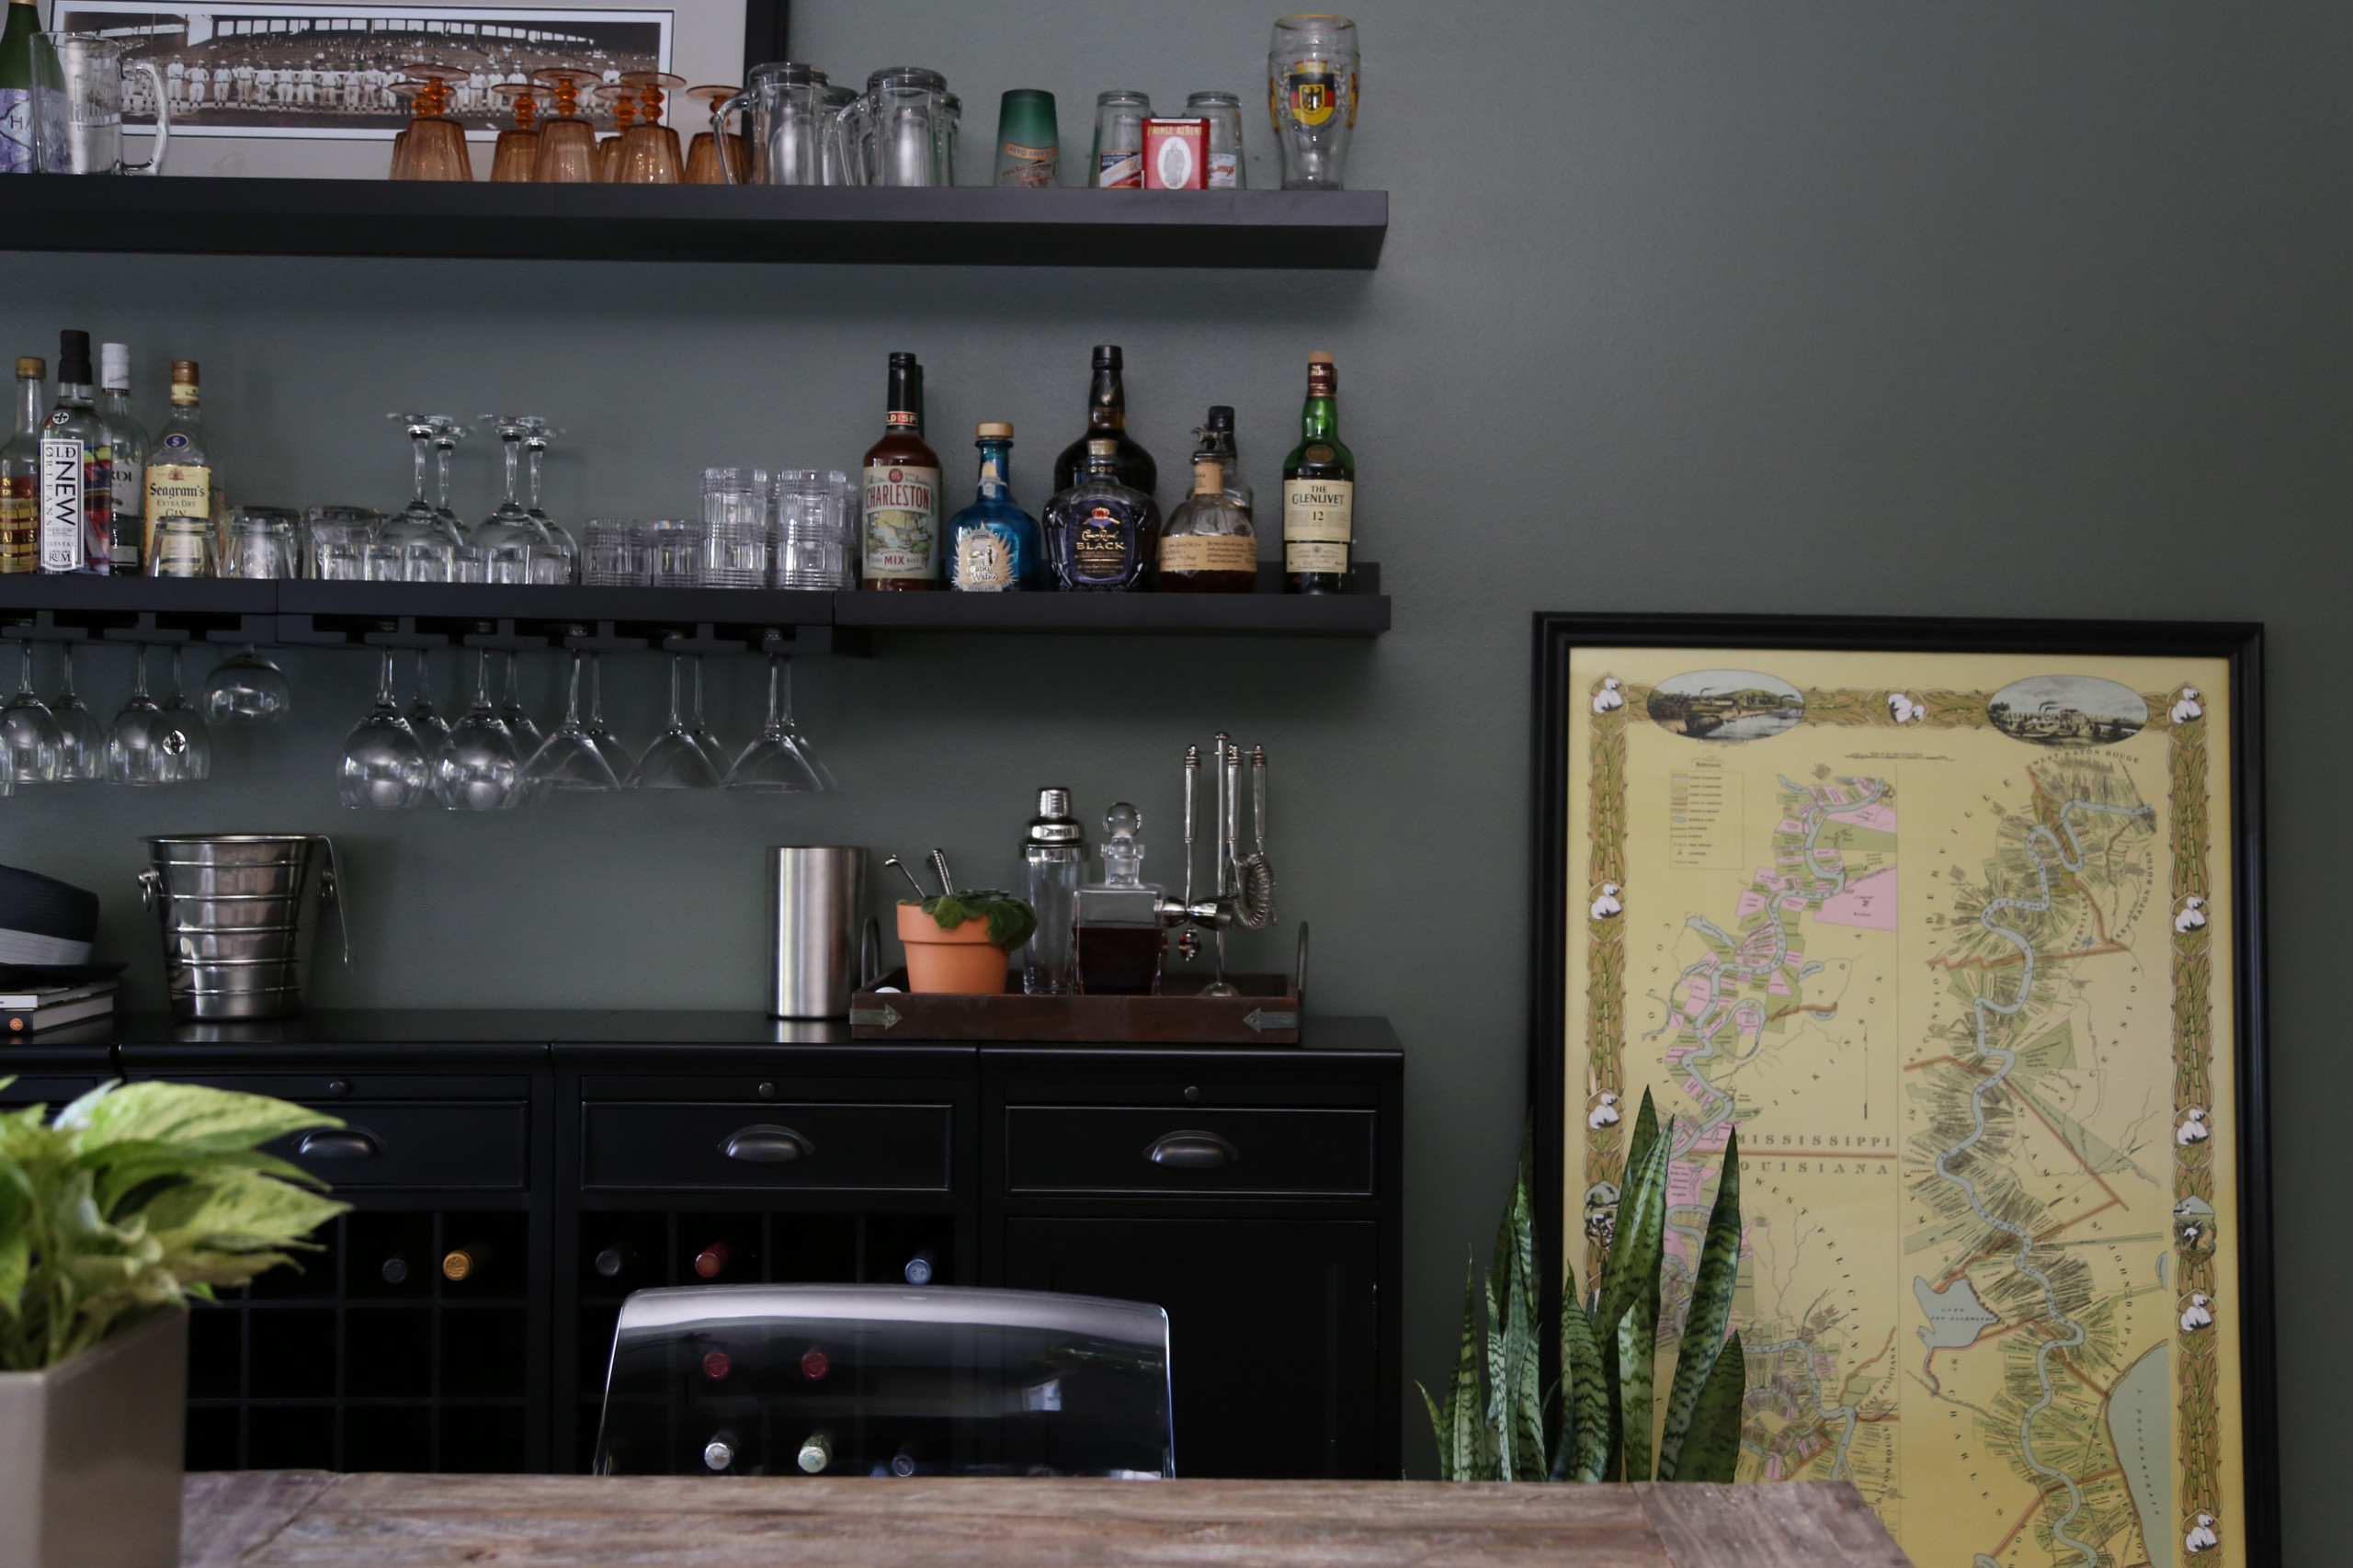 Residential Bar & Dining - Eclectic - Home Bar - New Orleans - by Niki  Landry Art & Design | Houzz